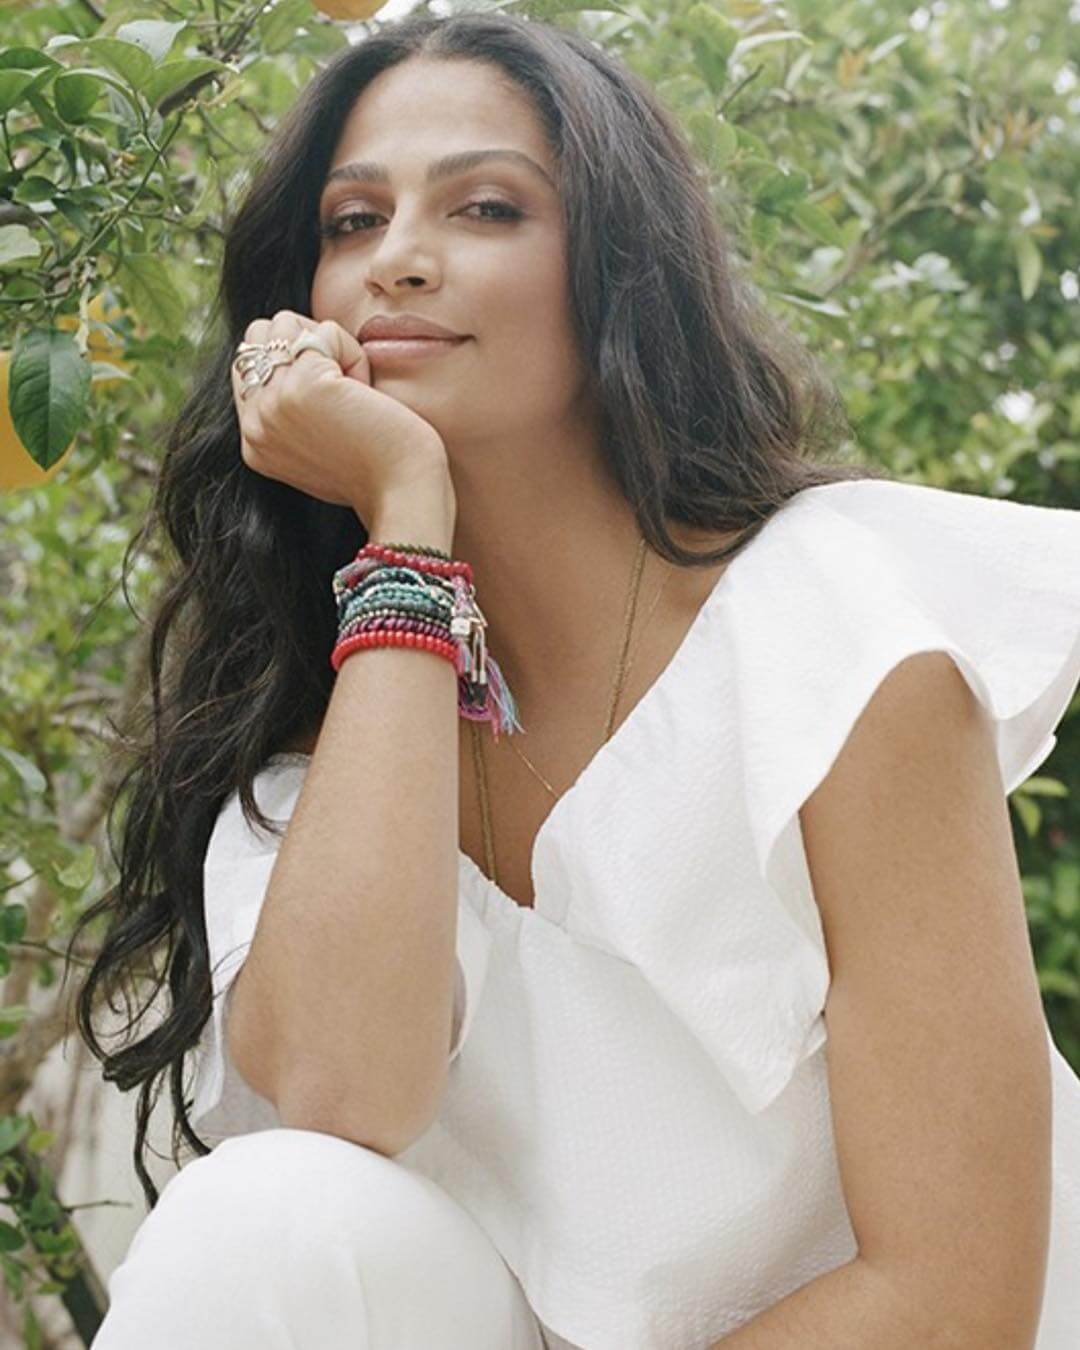 49 Hot Pictures Of Camila Alves Which Will Make You Fall In Love With Her | Best Of Comic Books